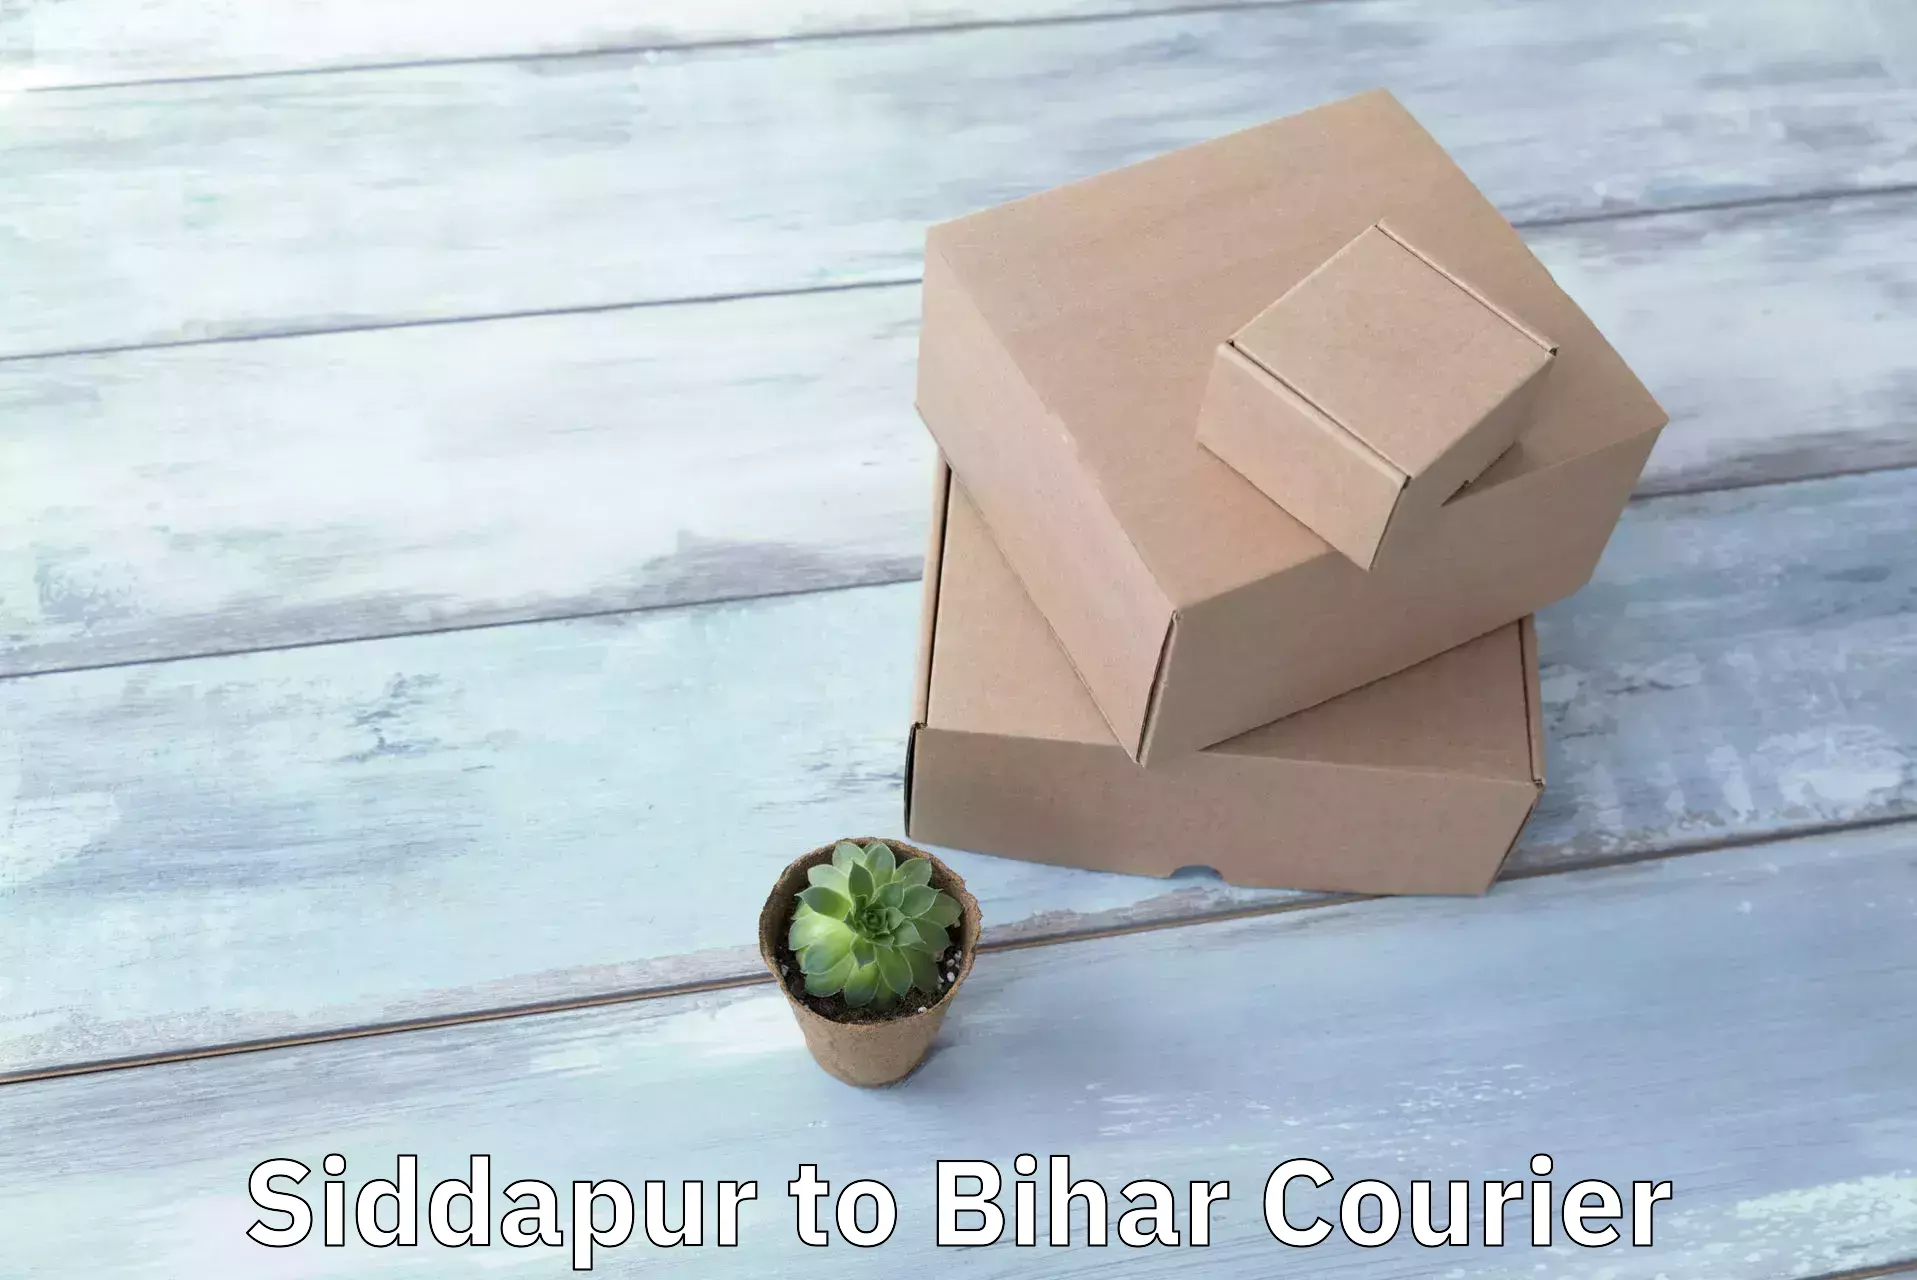 Courier insurance in Siddapur to Hazrat Jandaha